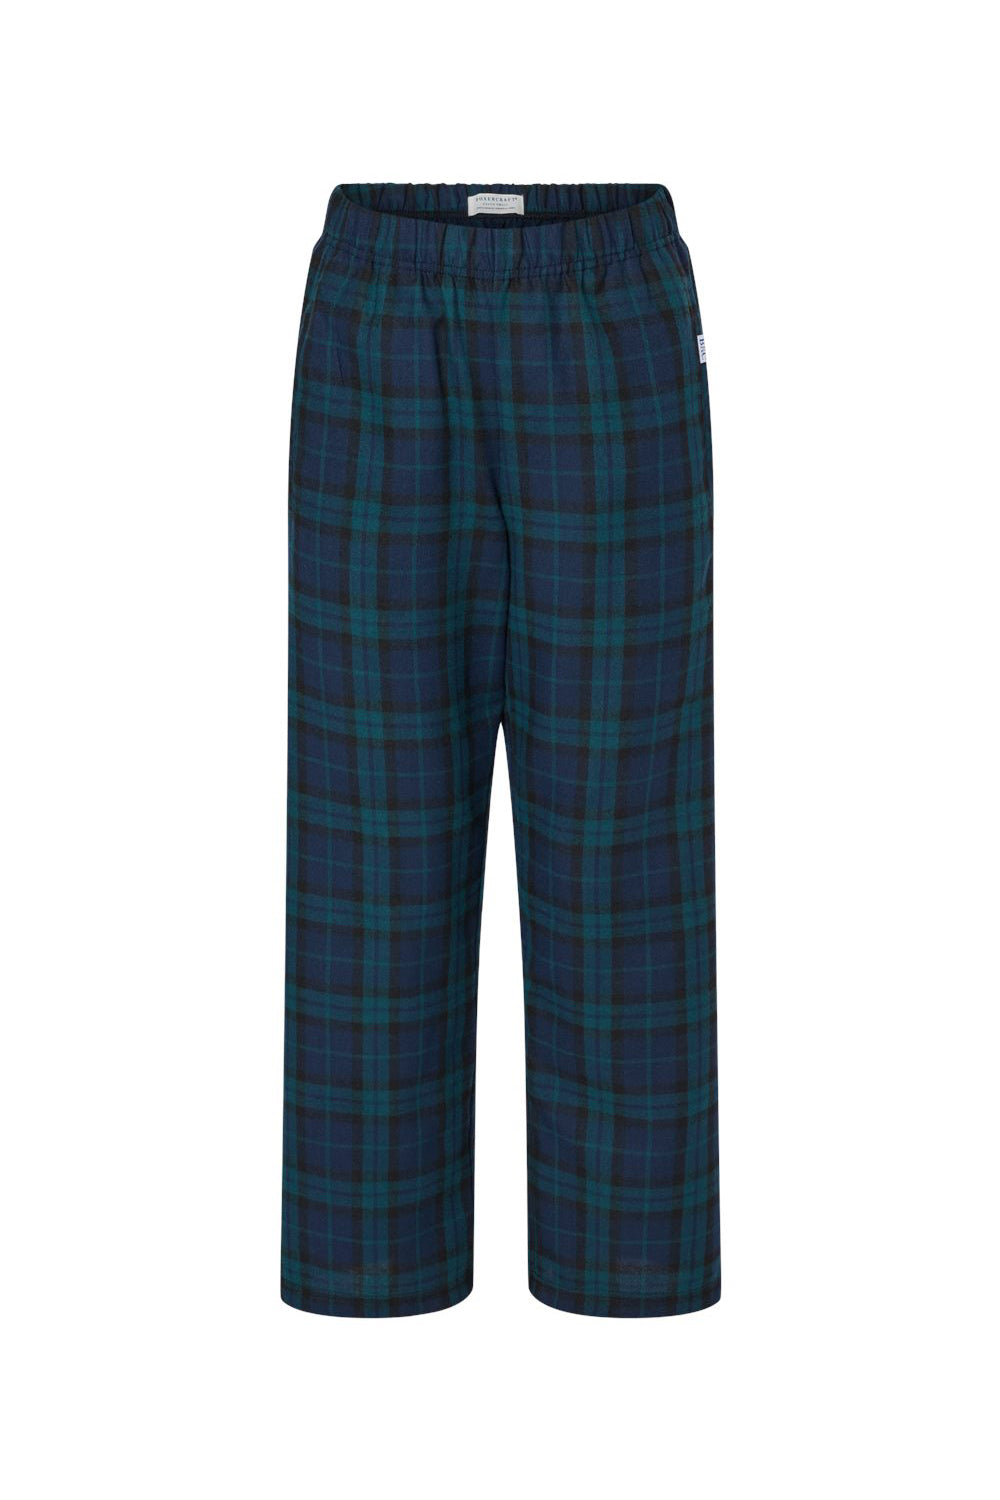 Boxercraft BY6624 Youth Flannel Pants Scottish Tartan Flat Front